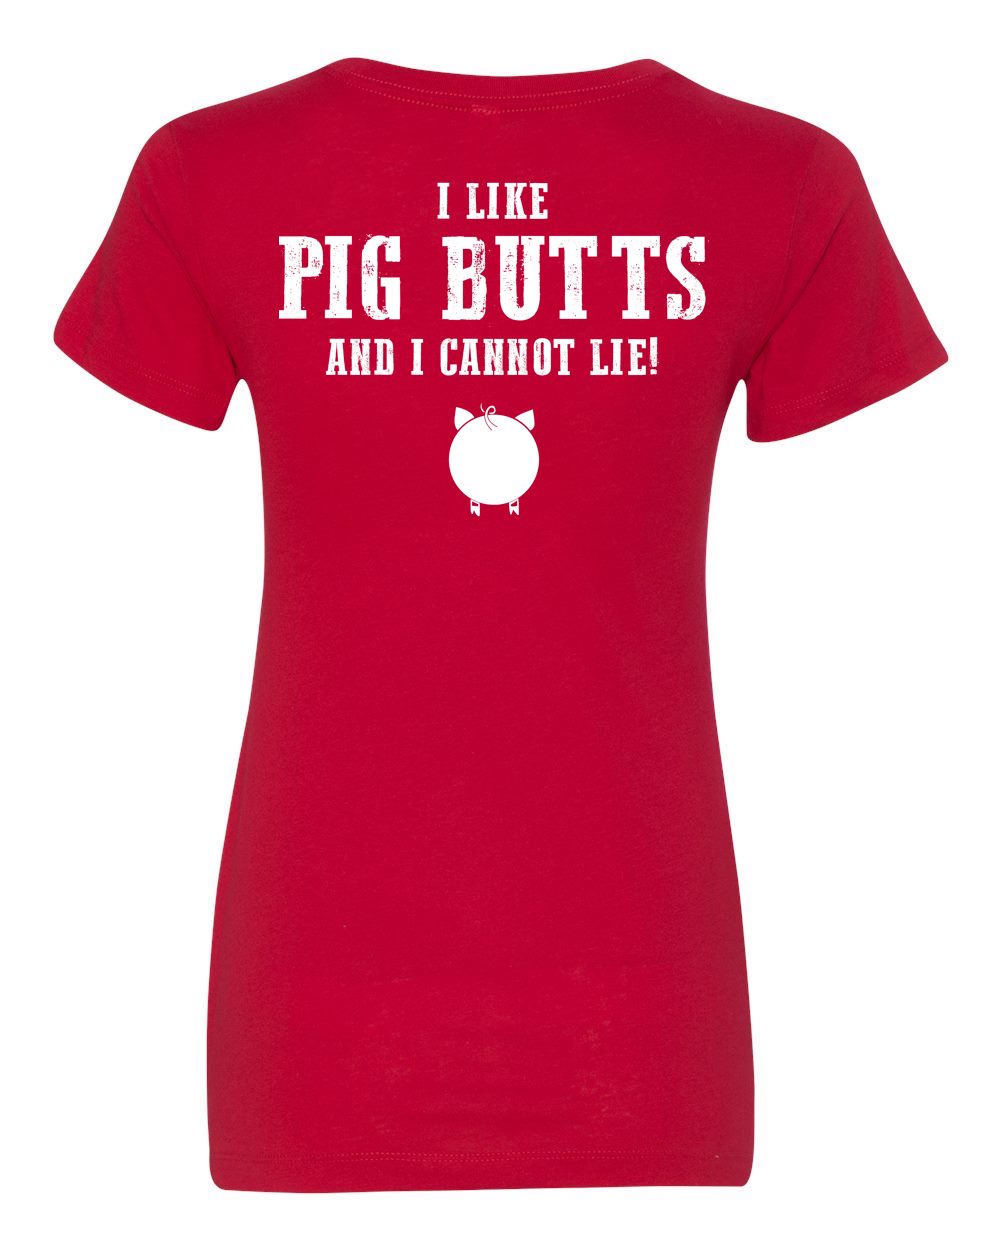 Brother Johns I Like Pig Butts Women’s T-Shirt